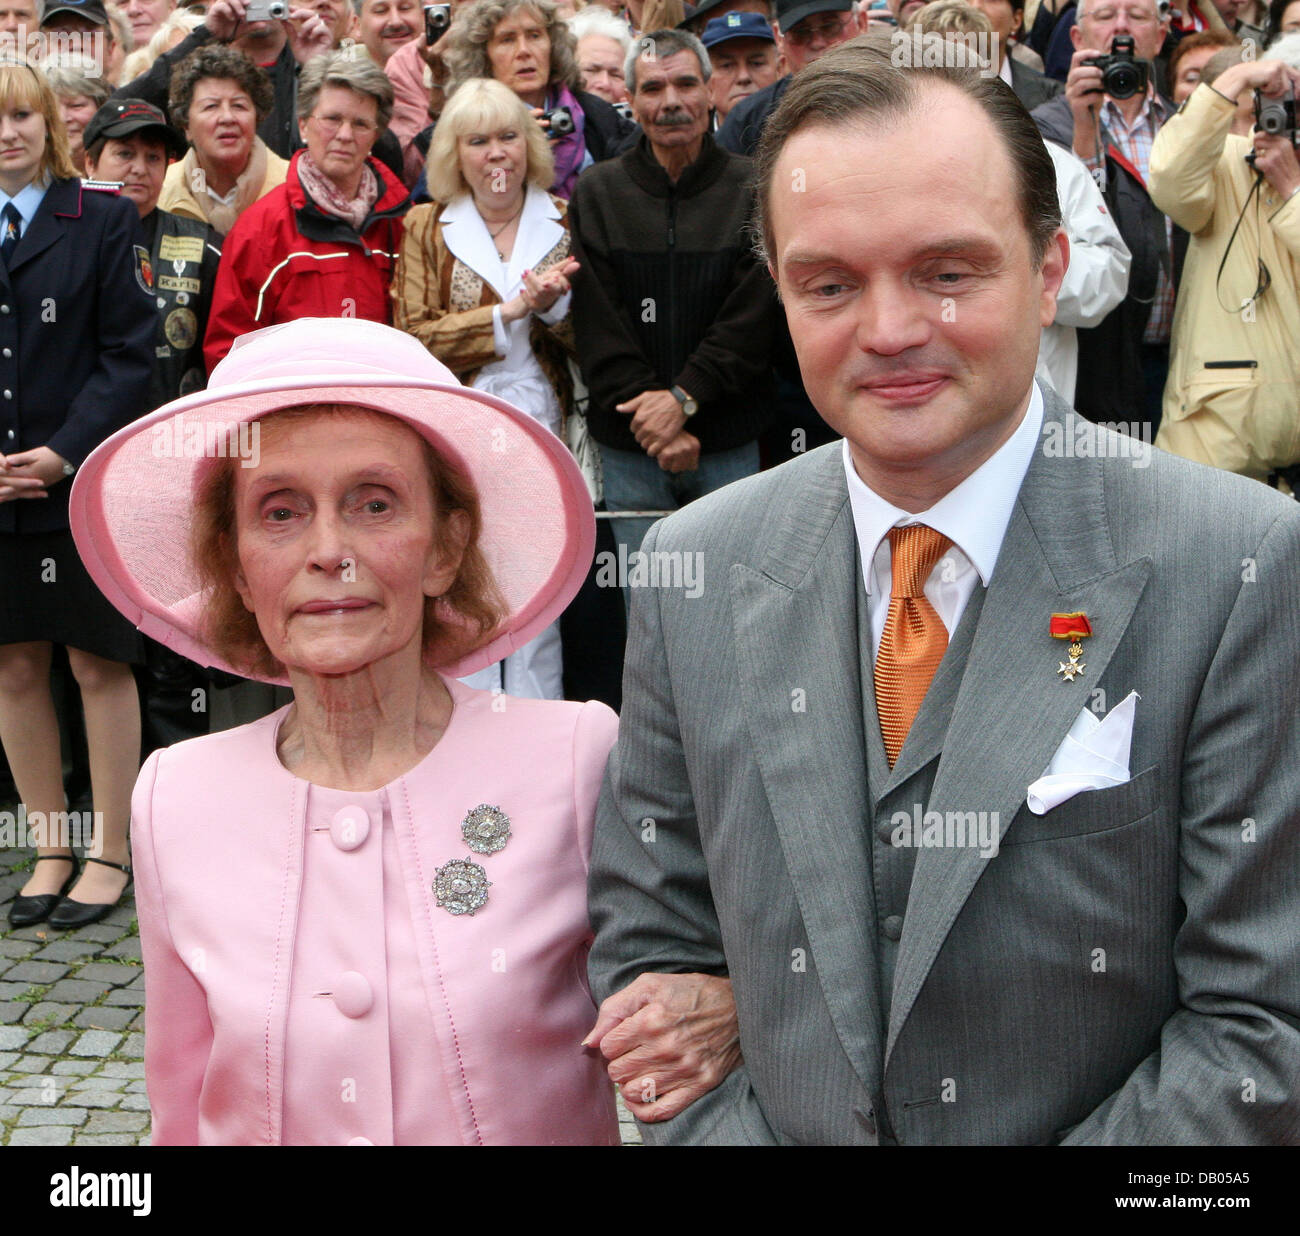 Alexander, Prince of Schaumburg-Lippe is pictured with his mother Benita princess of Schaumburg-Lippe going to his church wedding in Bueckeburg, Germany, 30 June 2007. Politicians, royals and celebrities were among the 750 invited guests. Photo:  Albert Nieboer (NETHERLANDS OUT) Stock Photo